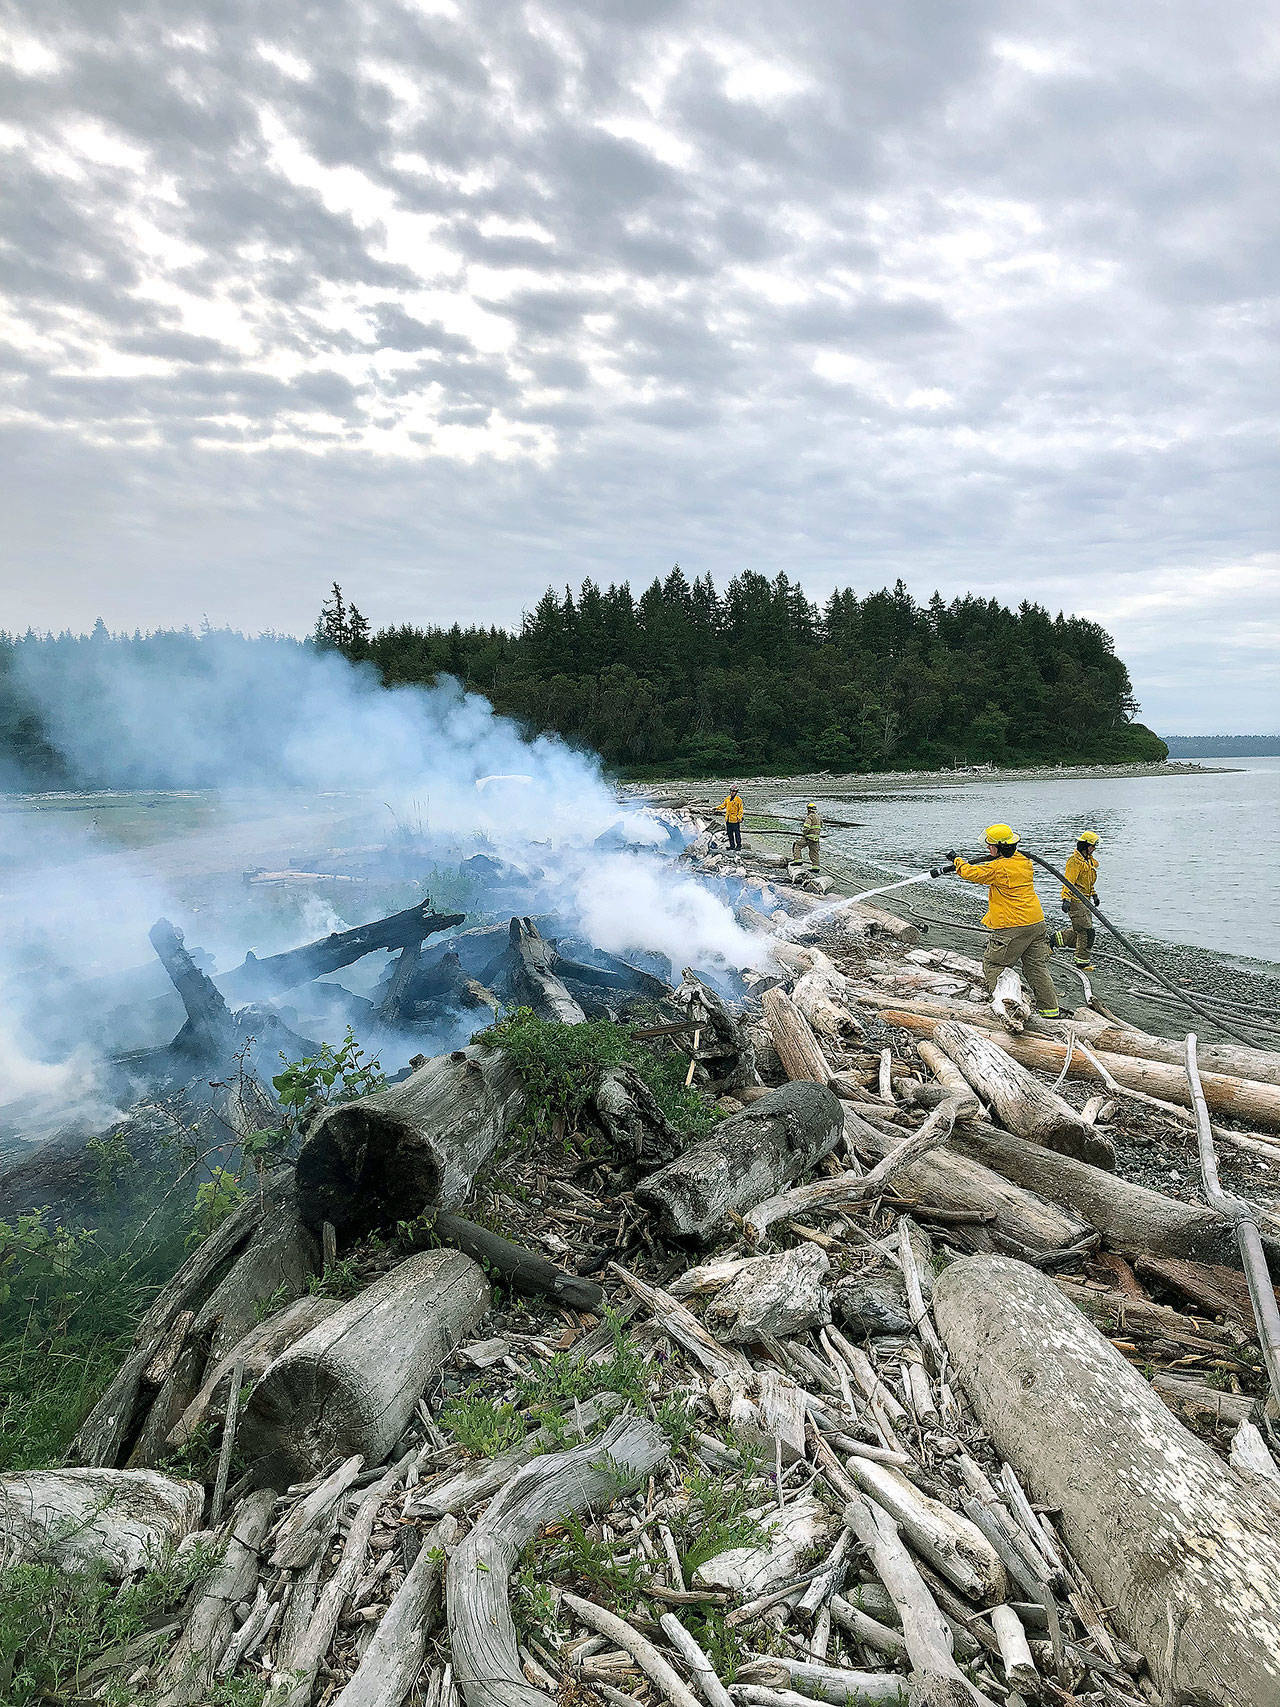 An incompletely-extinguished bonfire is thought to have sparked this May beach fire at the end of Shore Drive in Indianola. (Photo courtesy Michele Laboda, North Kitsap Fire and Rescue)